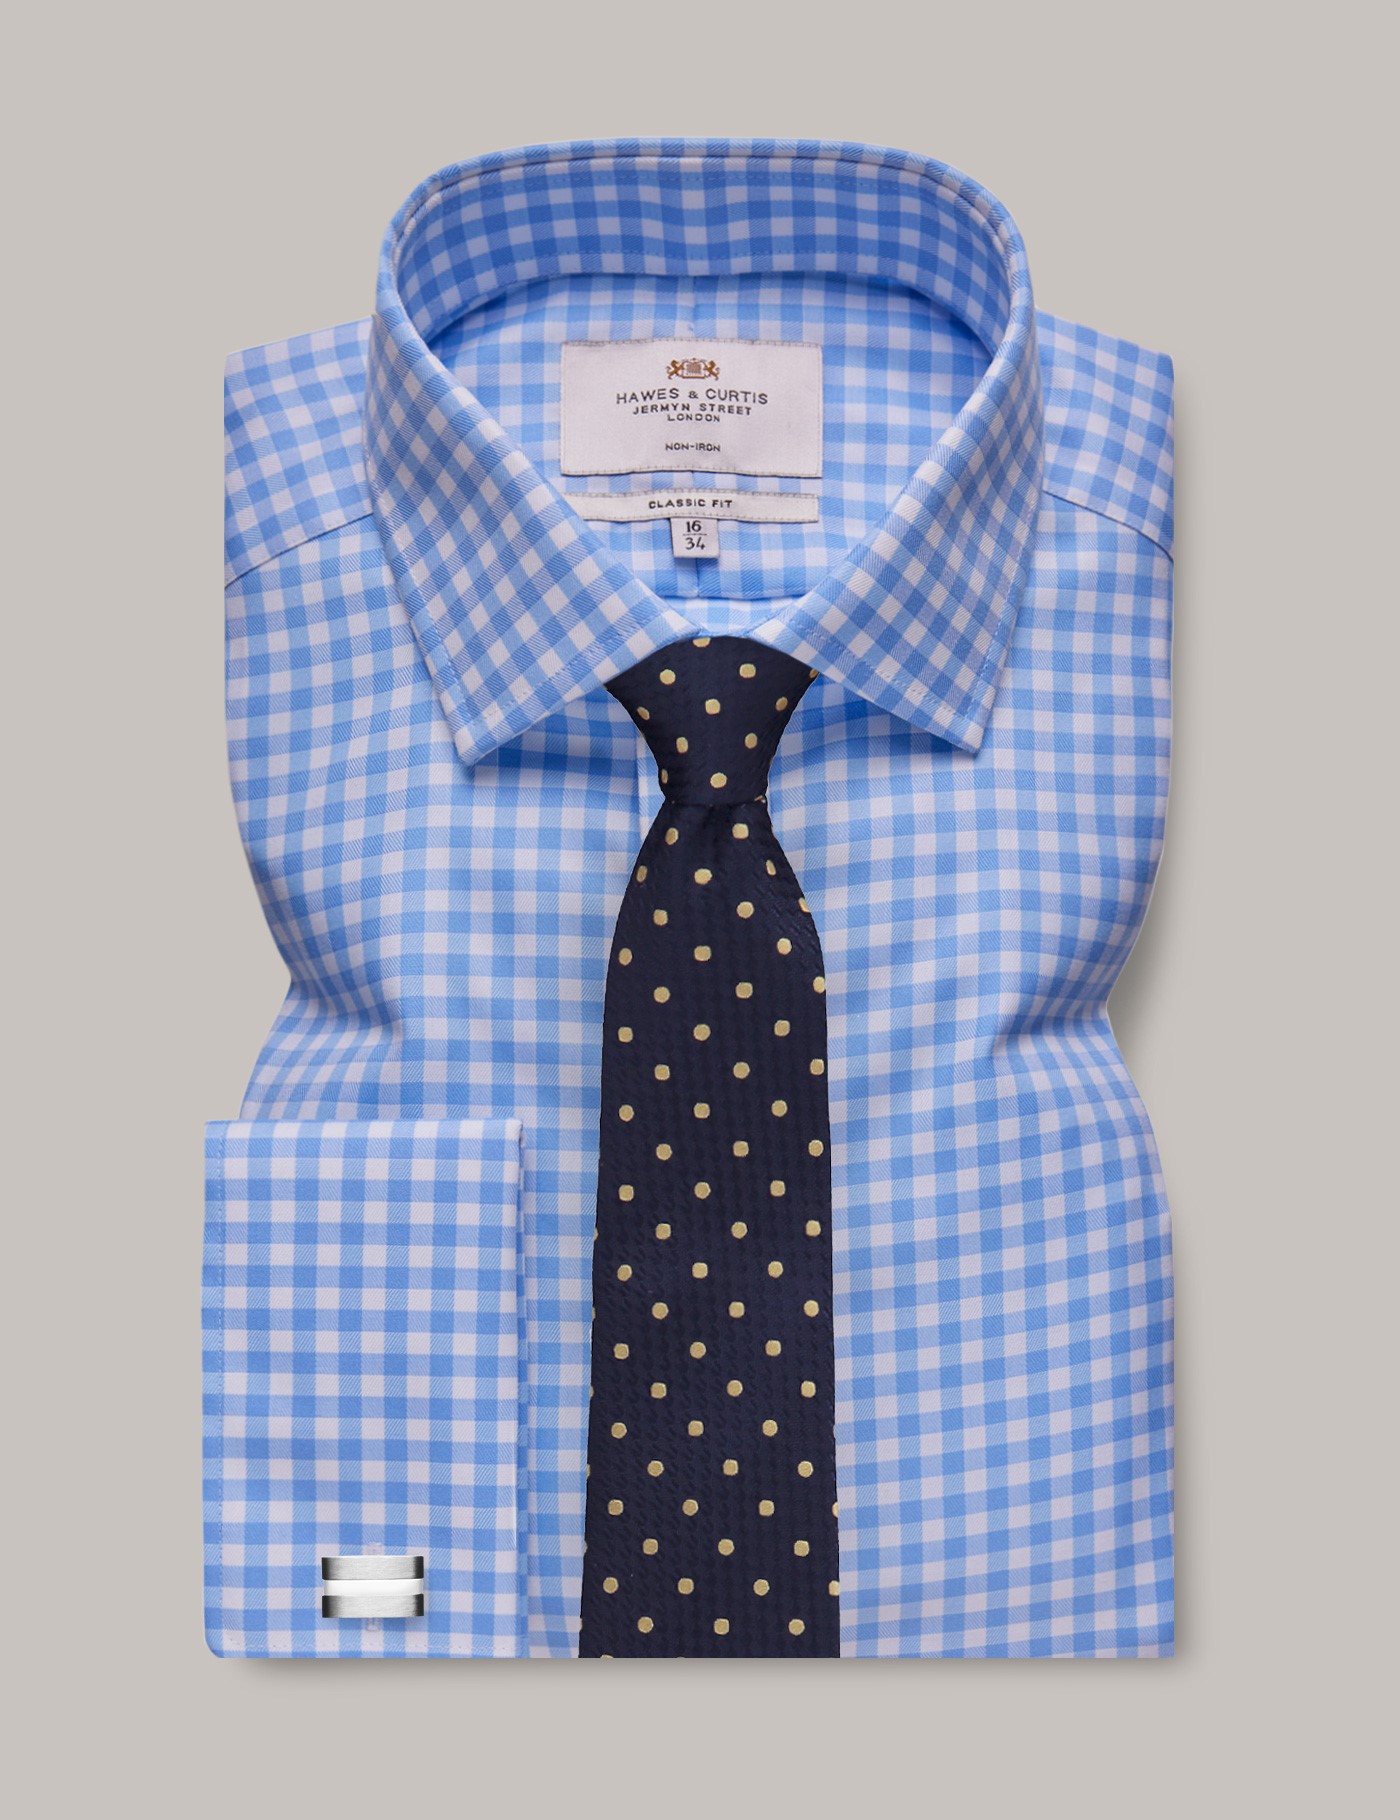 hawes & curtis non-iron blue & white large check classic shirt - double cuff